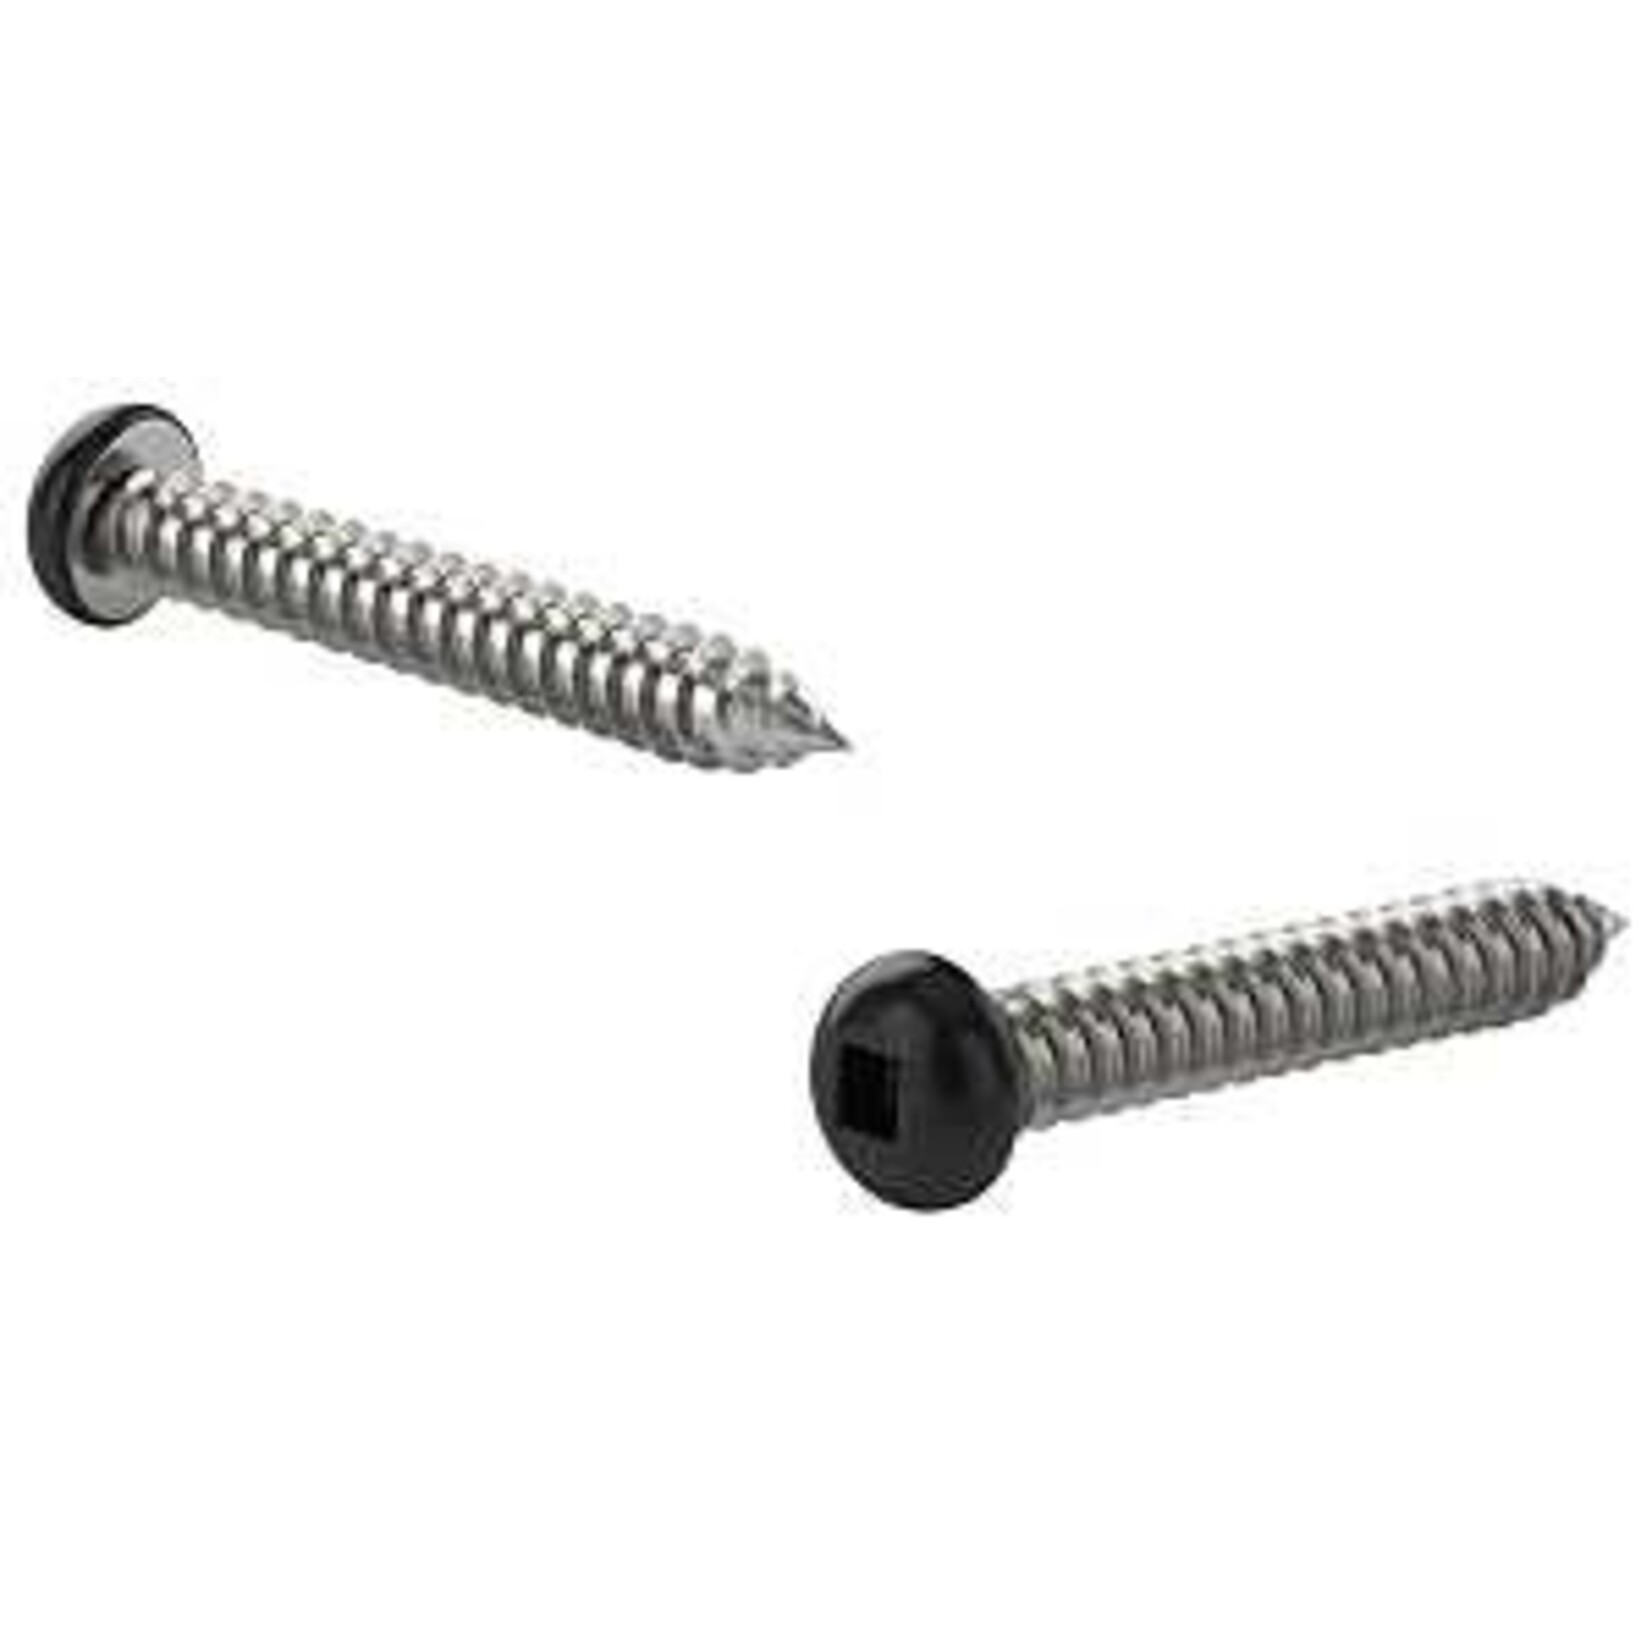 RELIABLE COLORED SCREW BLACK, PAN HEAD, SELF-TAPPING #6 5/8IN, 100PK